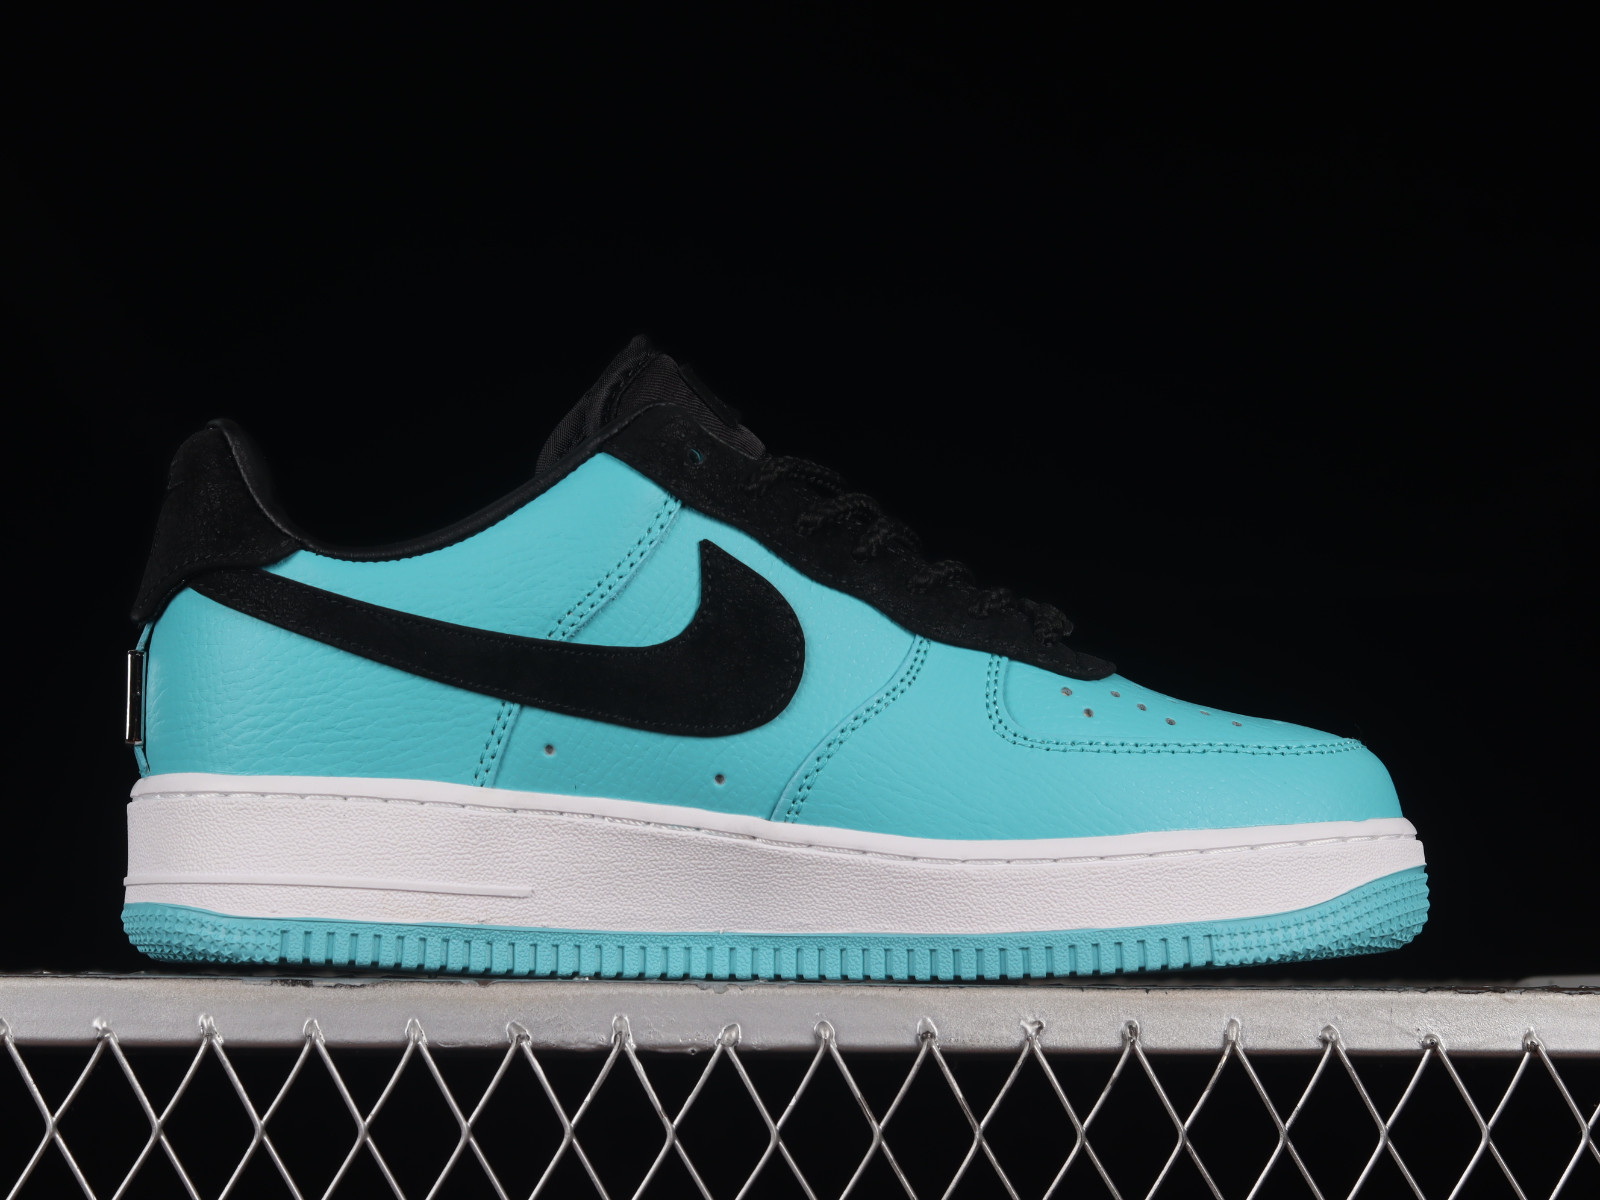 Tiffany & Co.: Tiffany & Co. x Nike Air Force 1 Low 1837 shoes